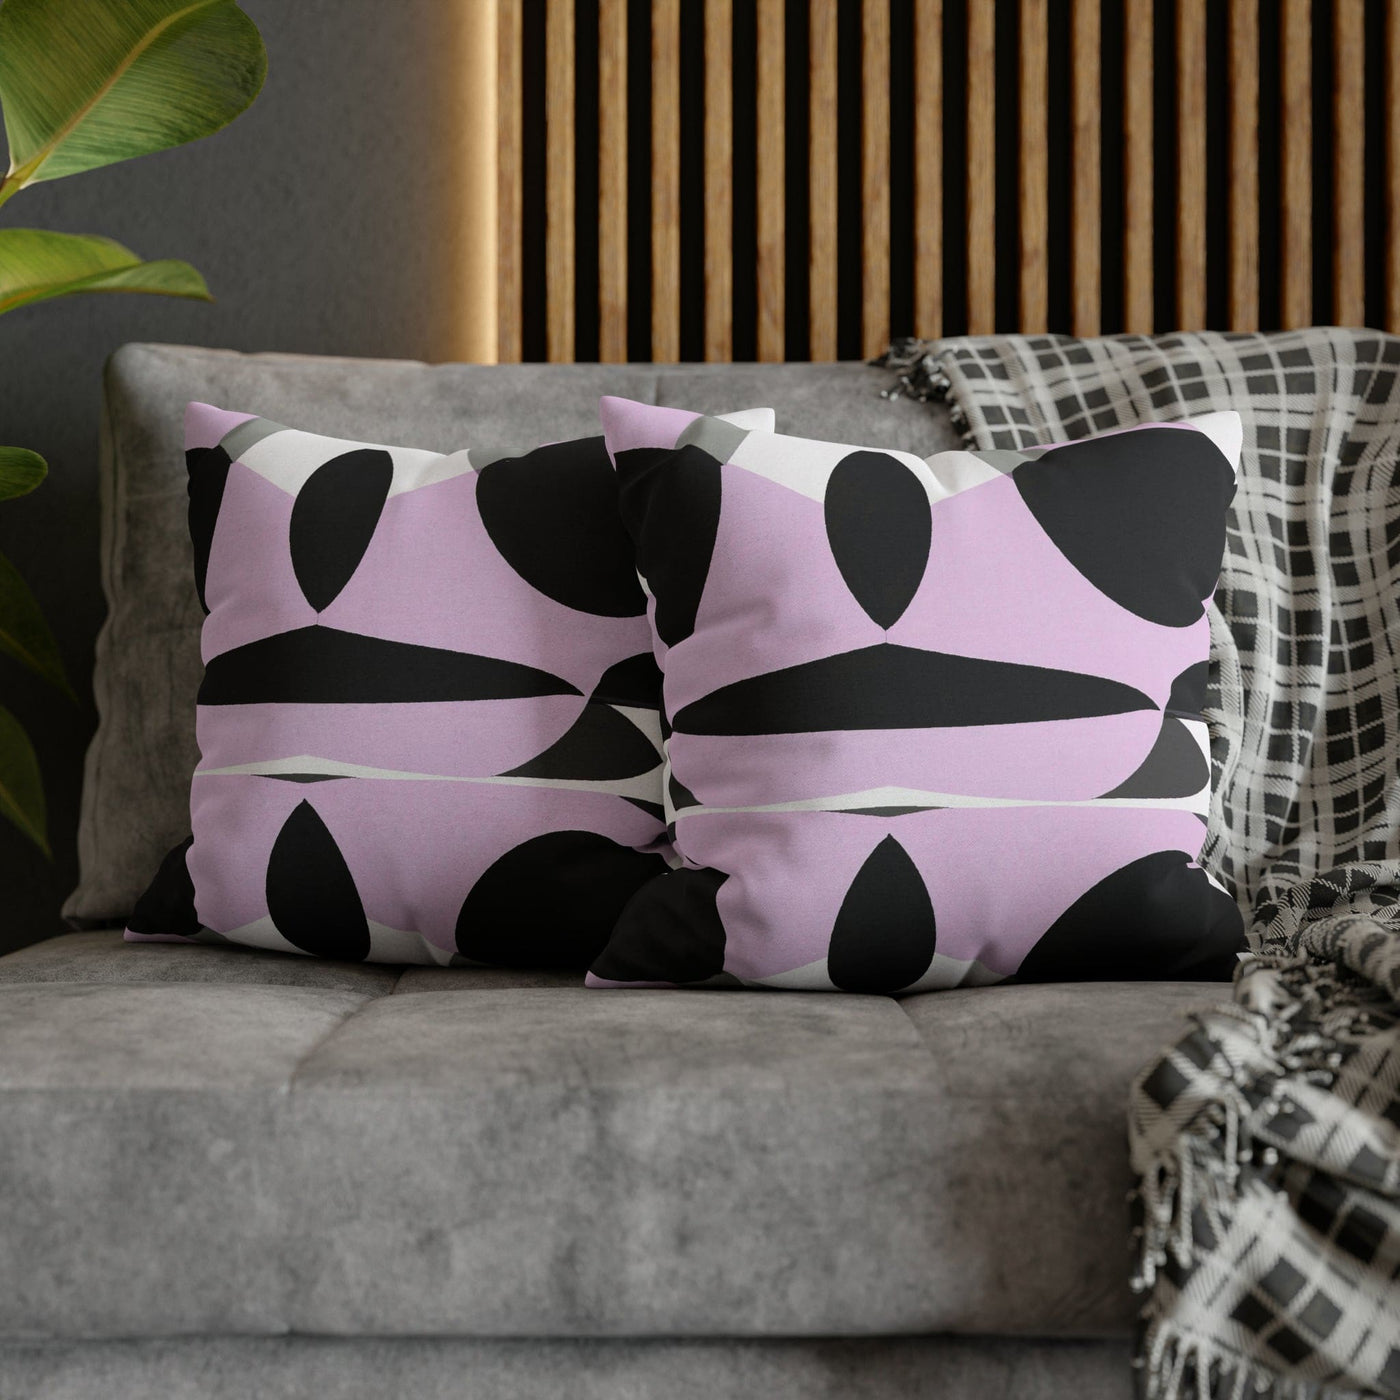 Decorative Throw Pillow Covers With Zipper - Set Of 2 Geometric Lavender And